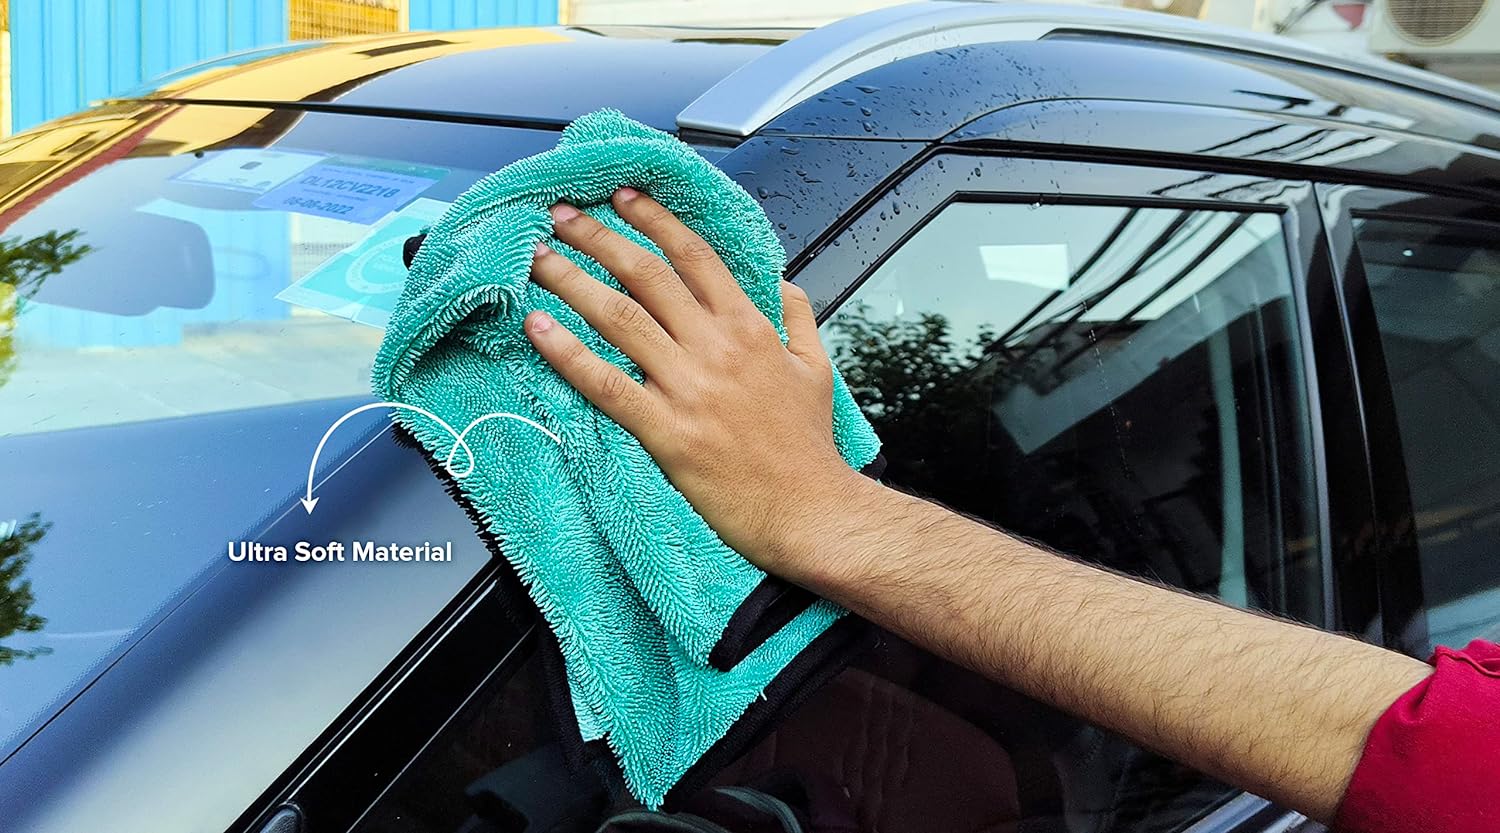 SOFTSPUN Microfiber Cloth for Car - 800 GSM, Aqua Blue Twisted Loop Super Absorbent Towel - Edgeless Design with Plush Pile and Lint Free Cloth for Drying and Detailing.